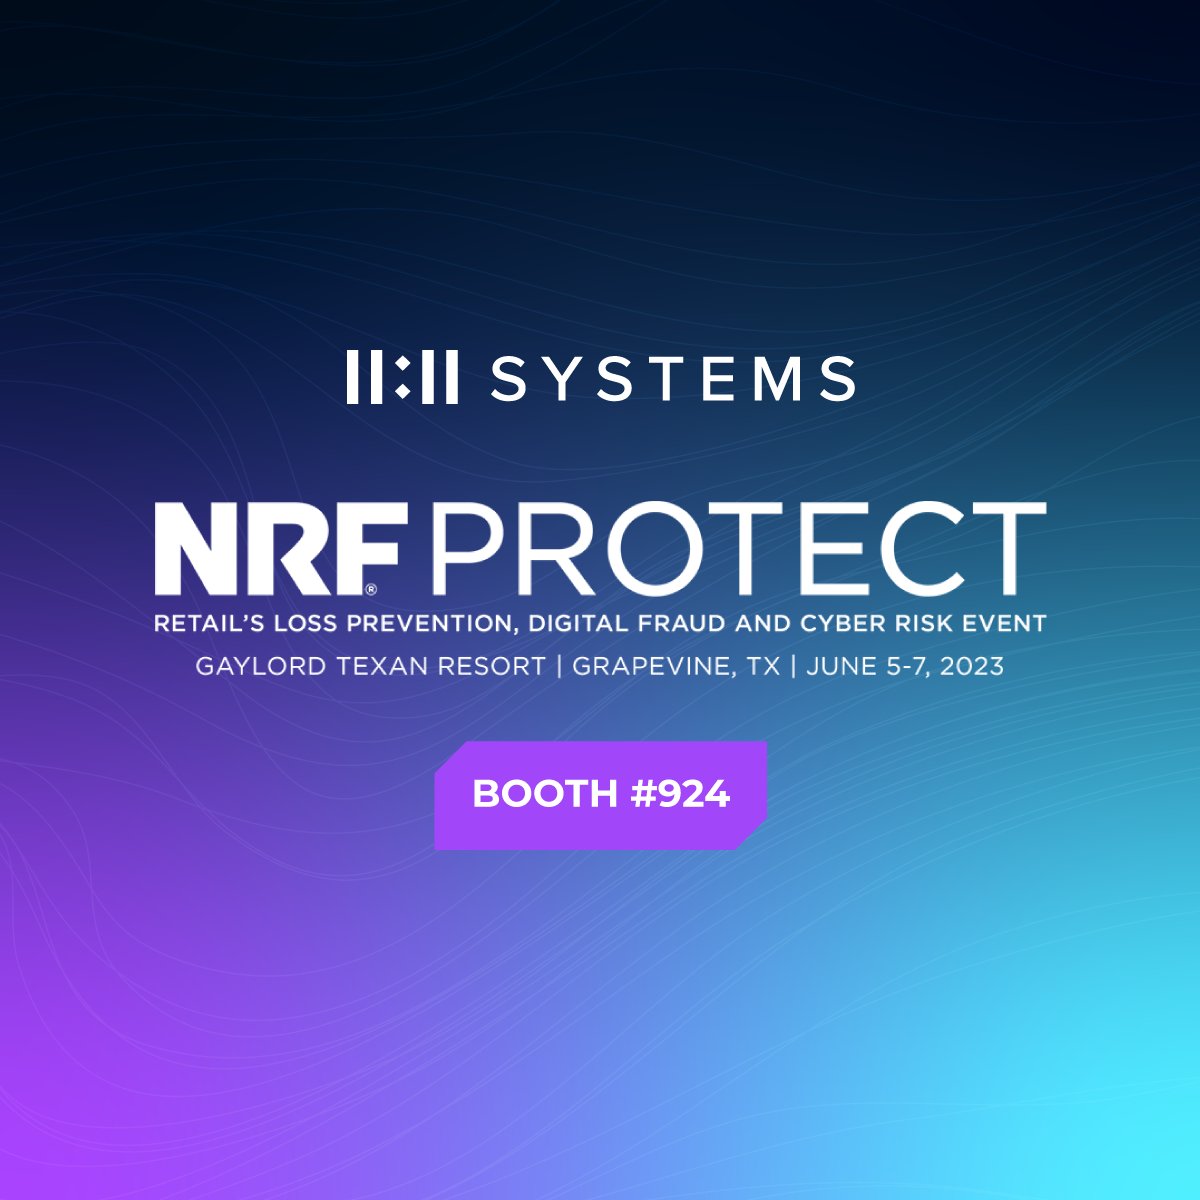 You keep your organization safe. We give you the tools to do it successfully. Learn more and join us June 5-7 at booth #924 for the @NRFnews #NRFPROTECT!